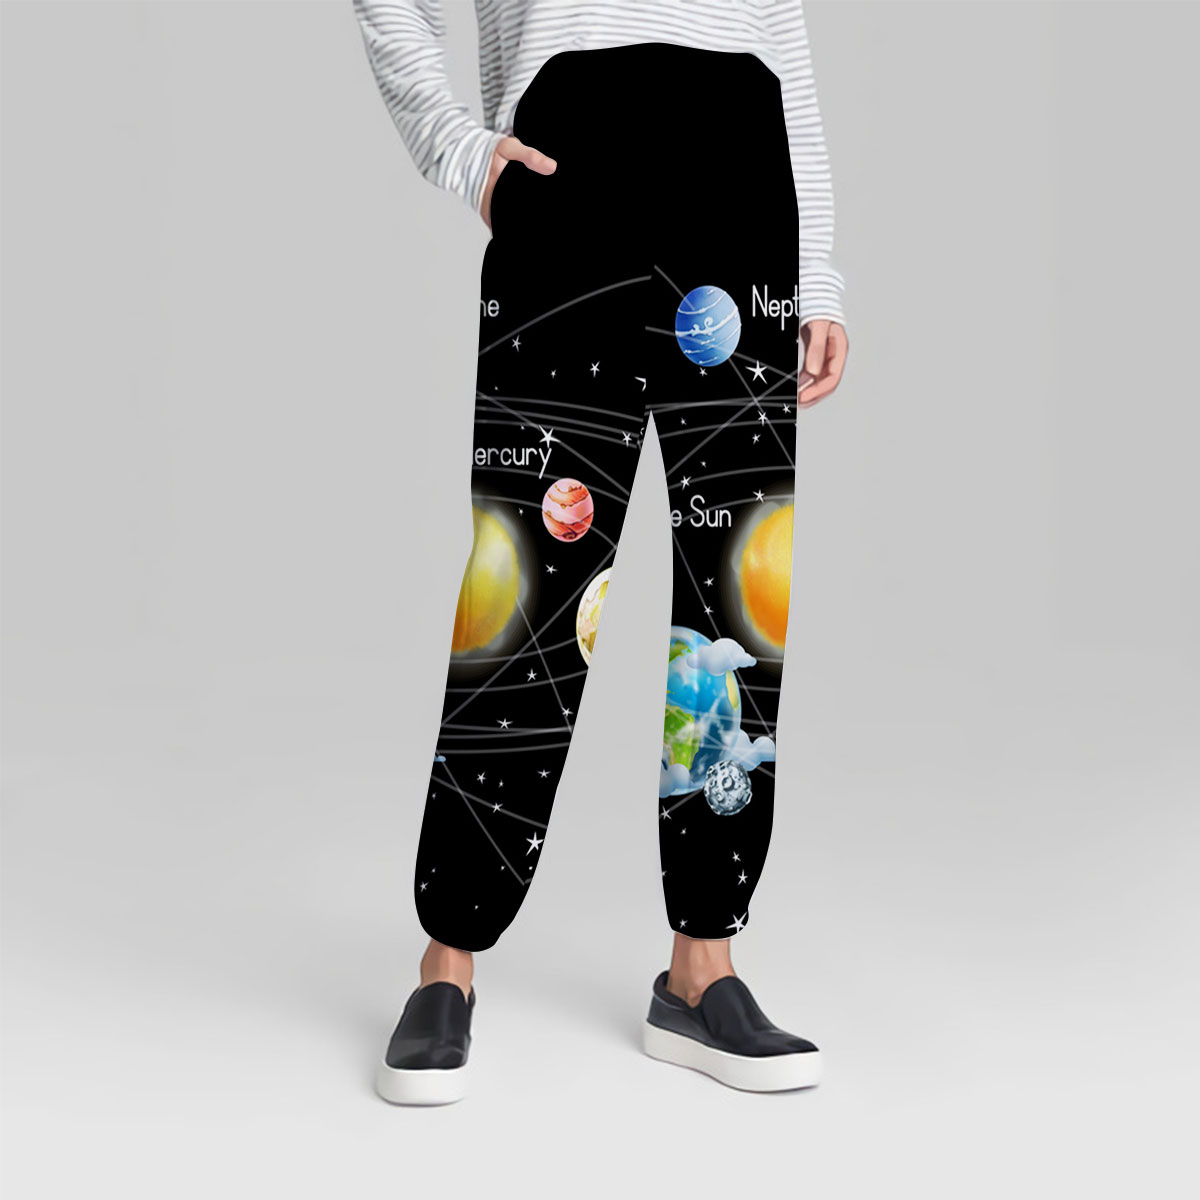 Our Planet Sweatpant